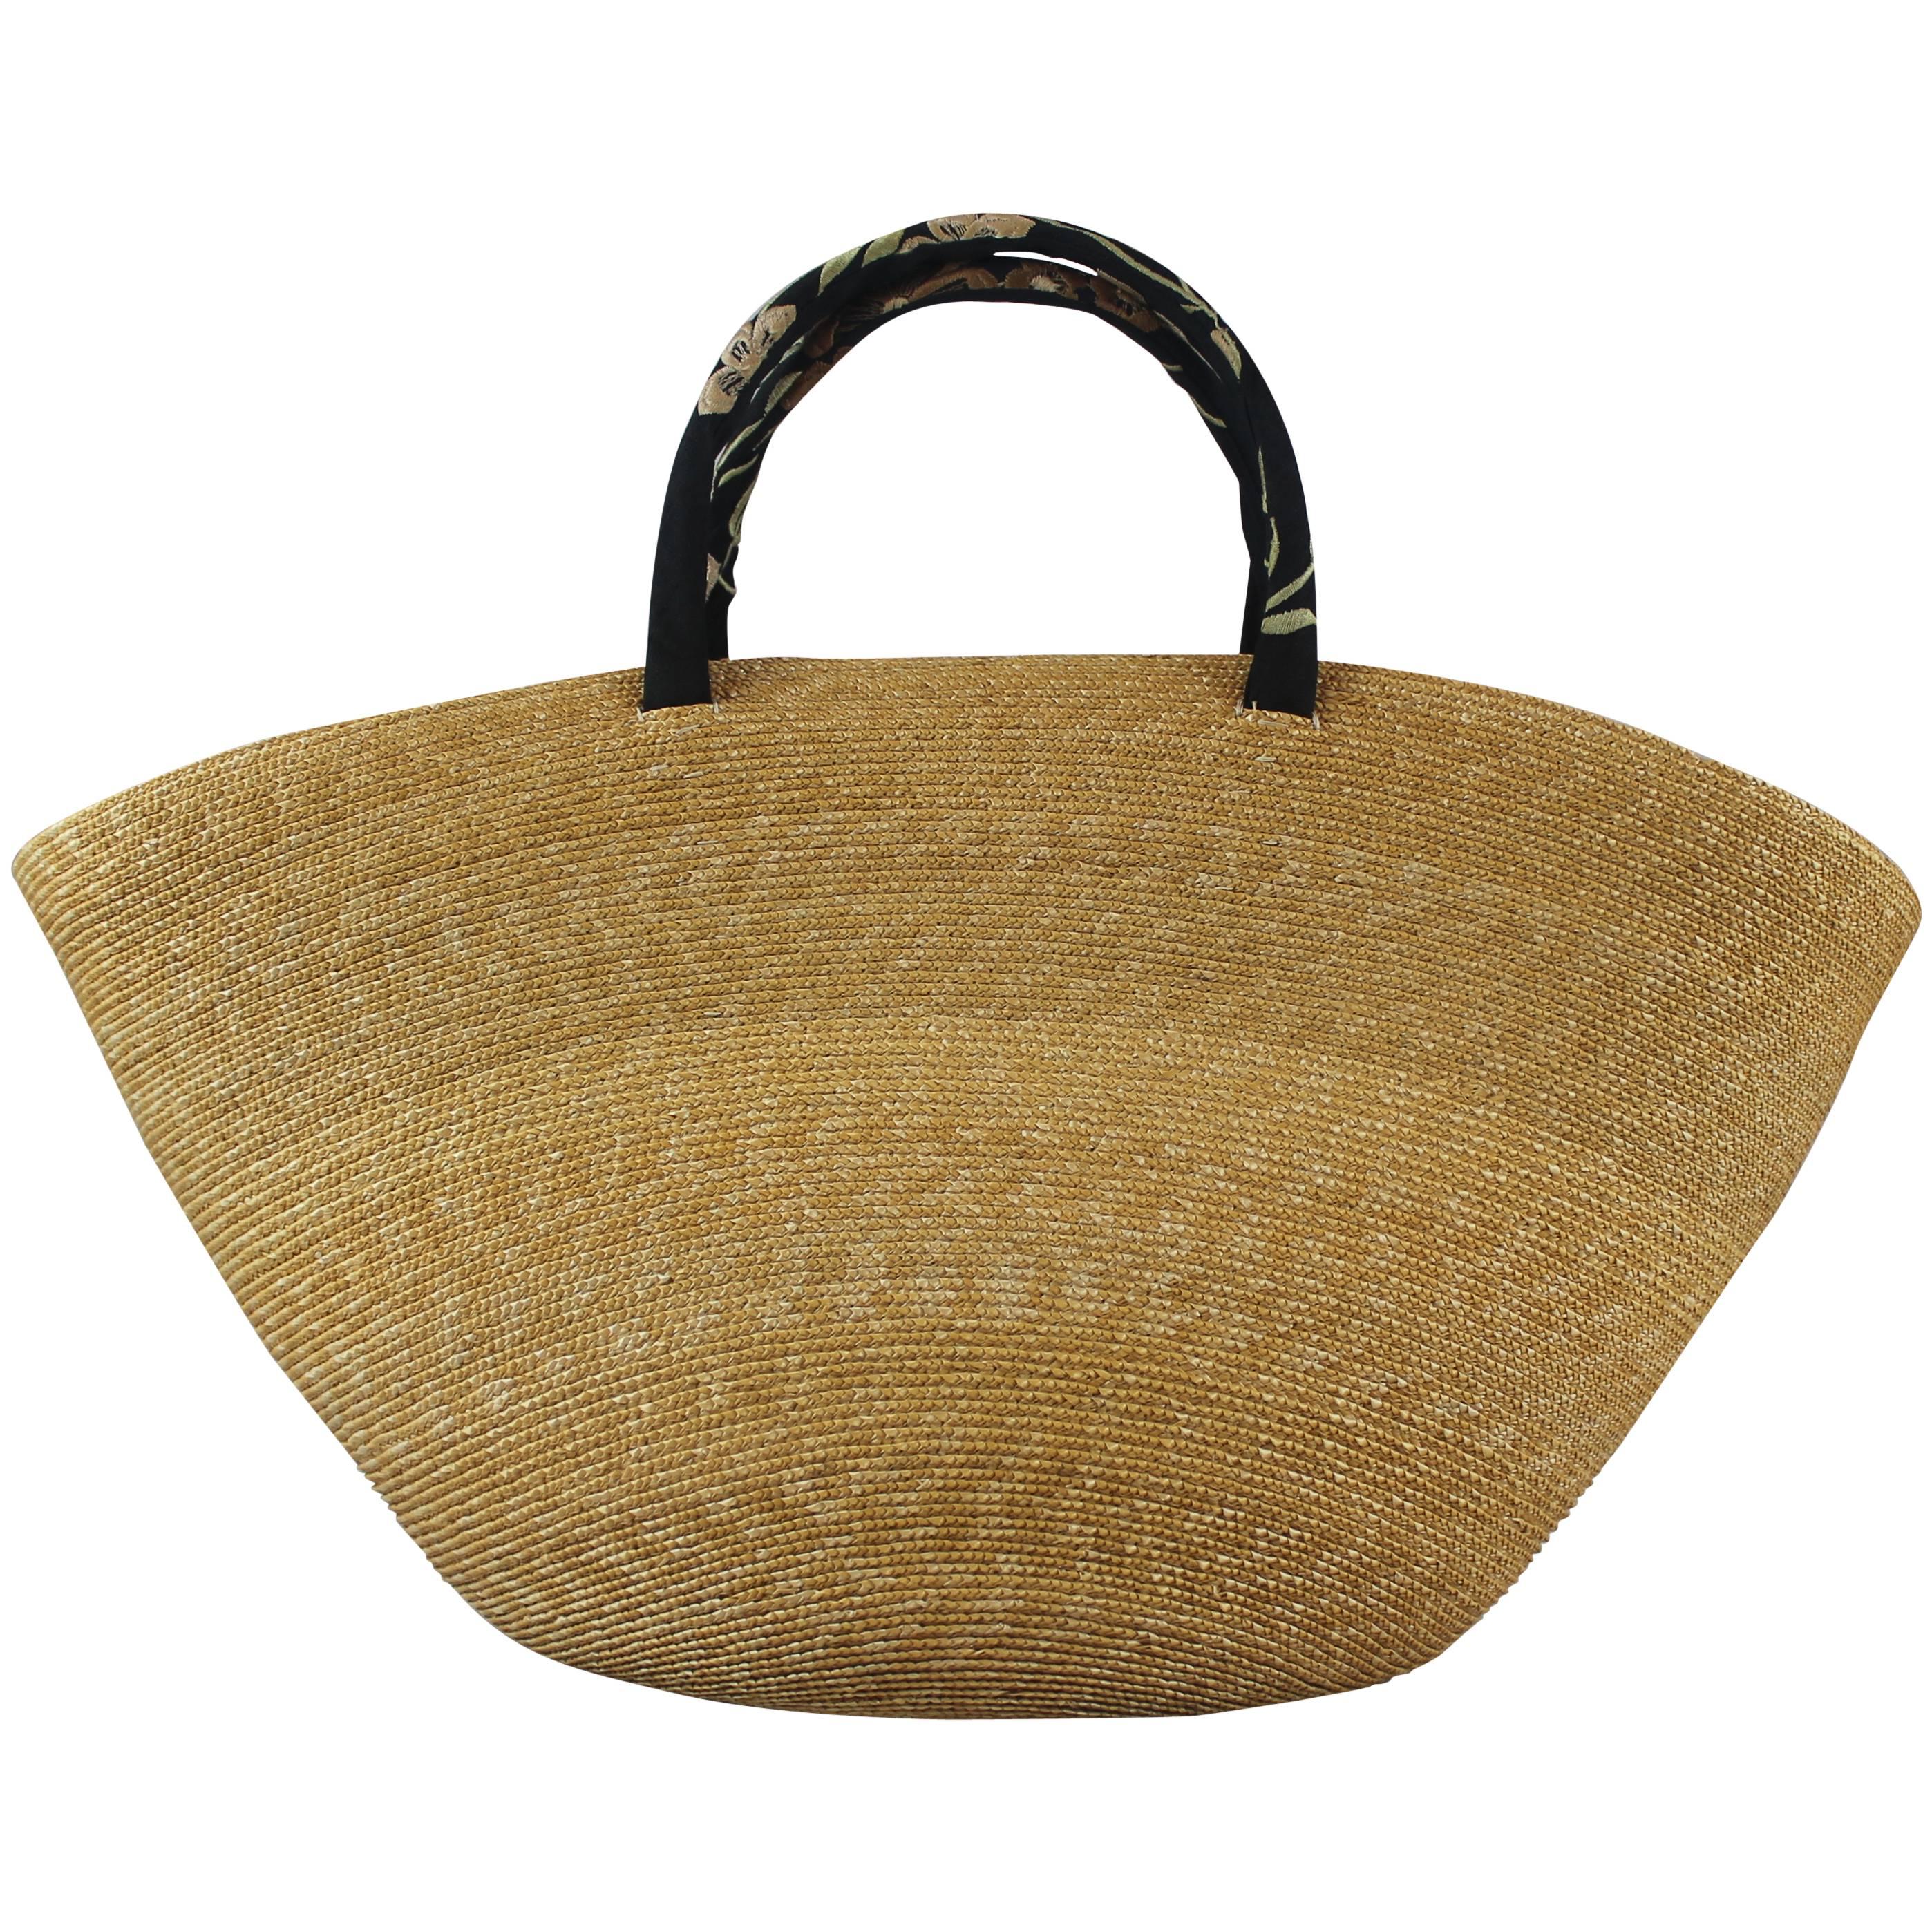 Suzanne Couture Millinery Small Tan Woven Straw Bag with Floral Handles